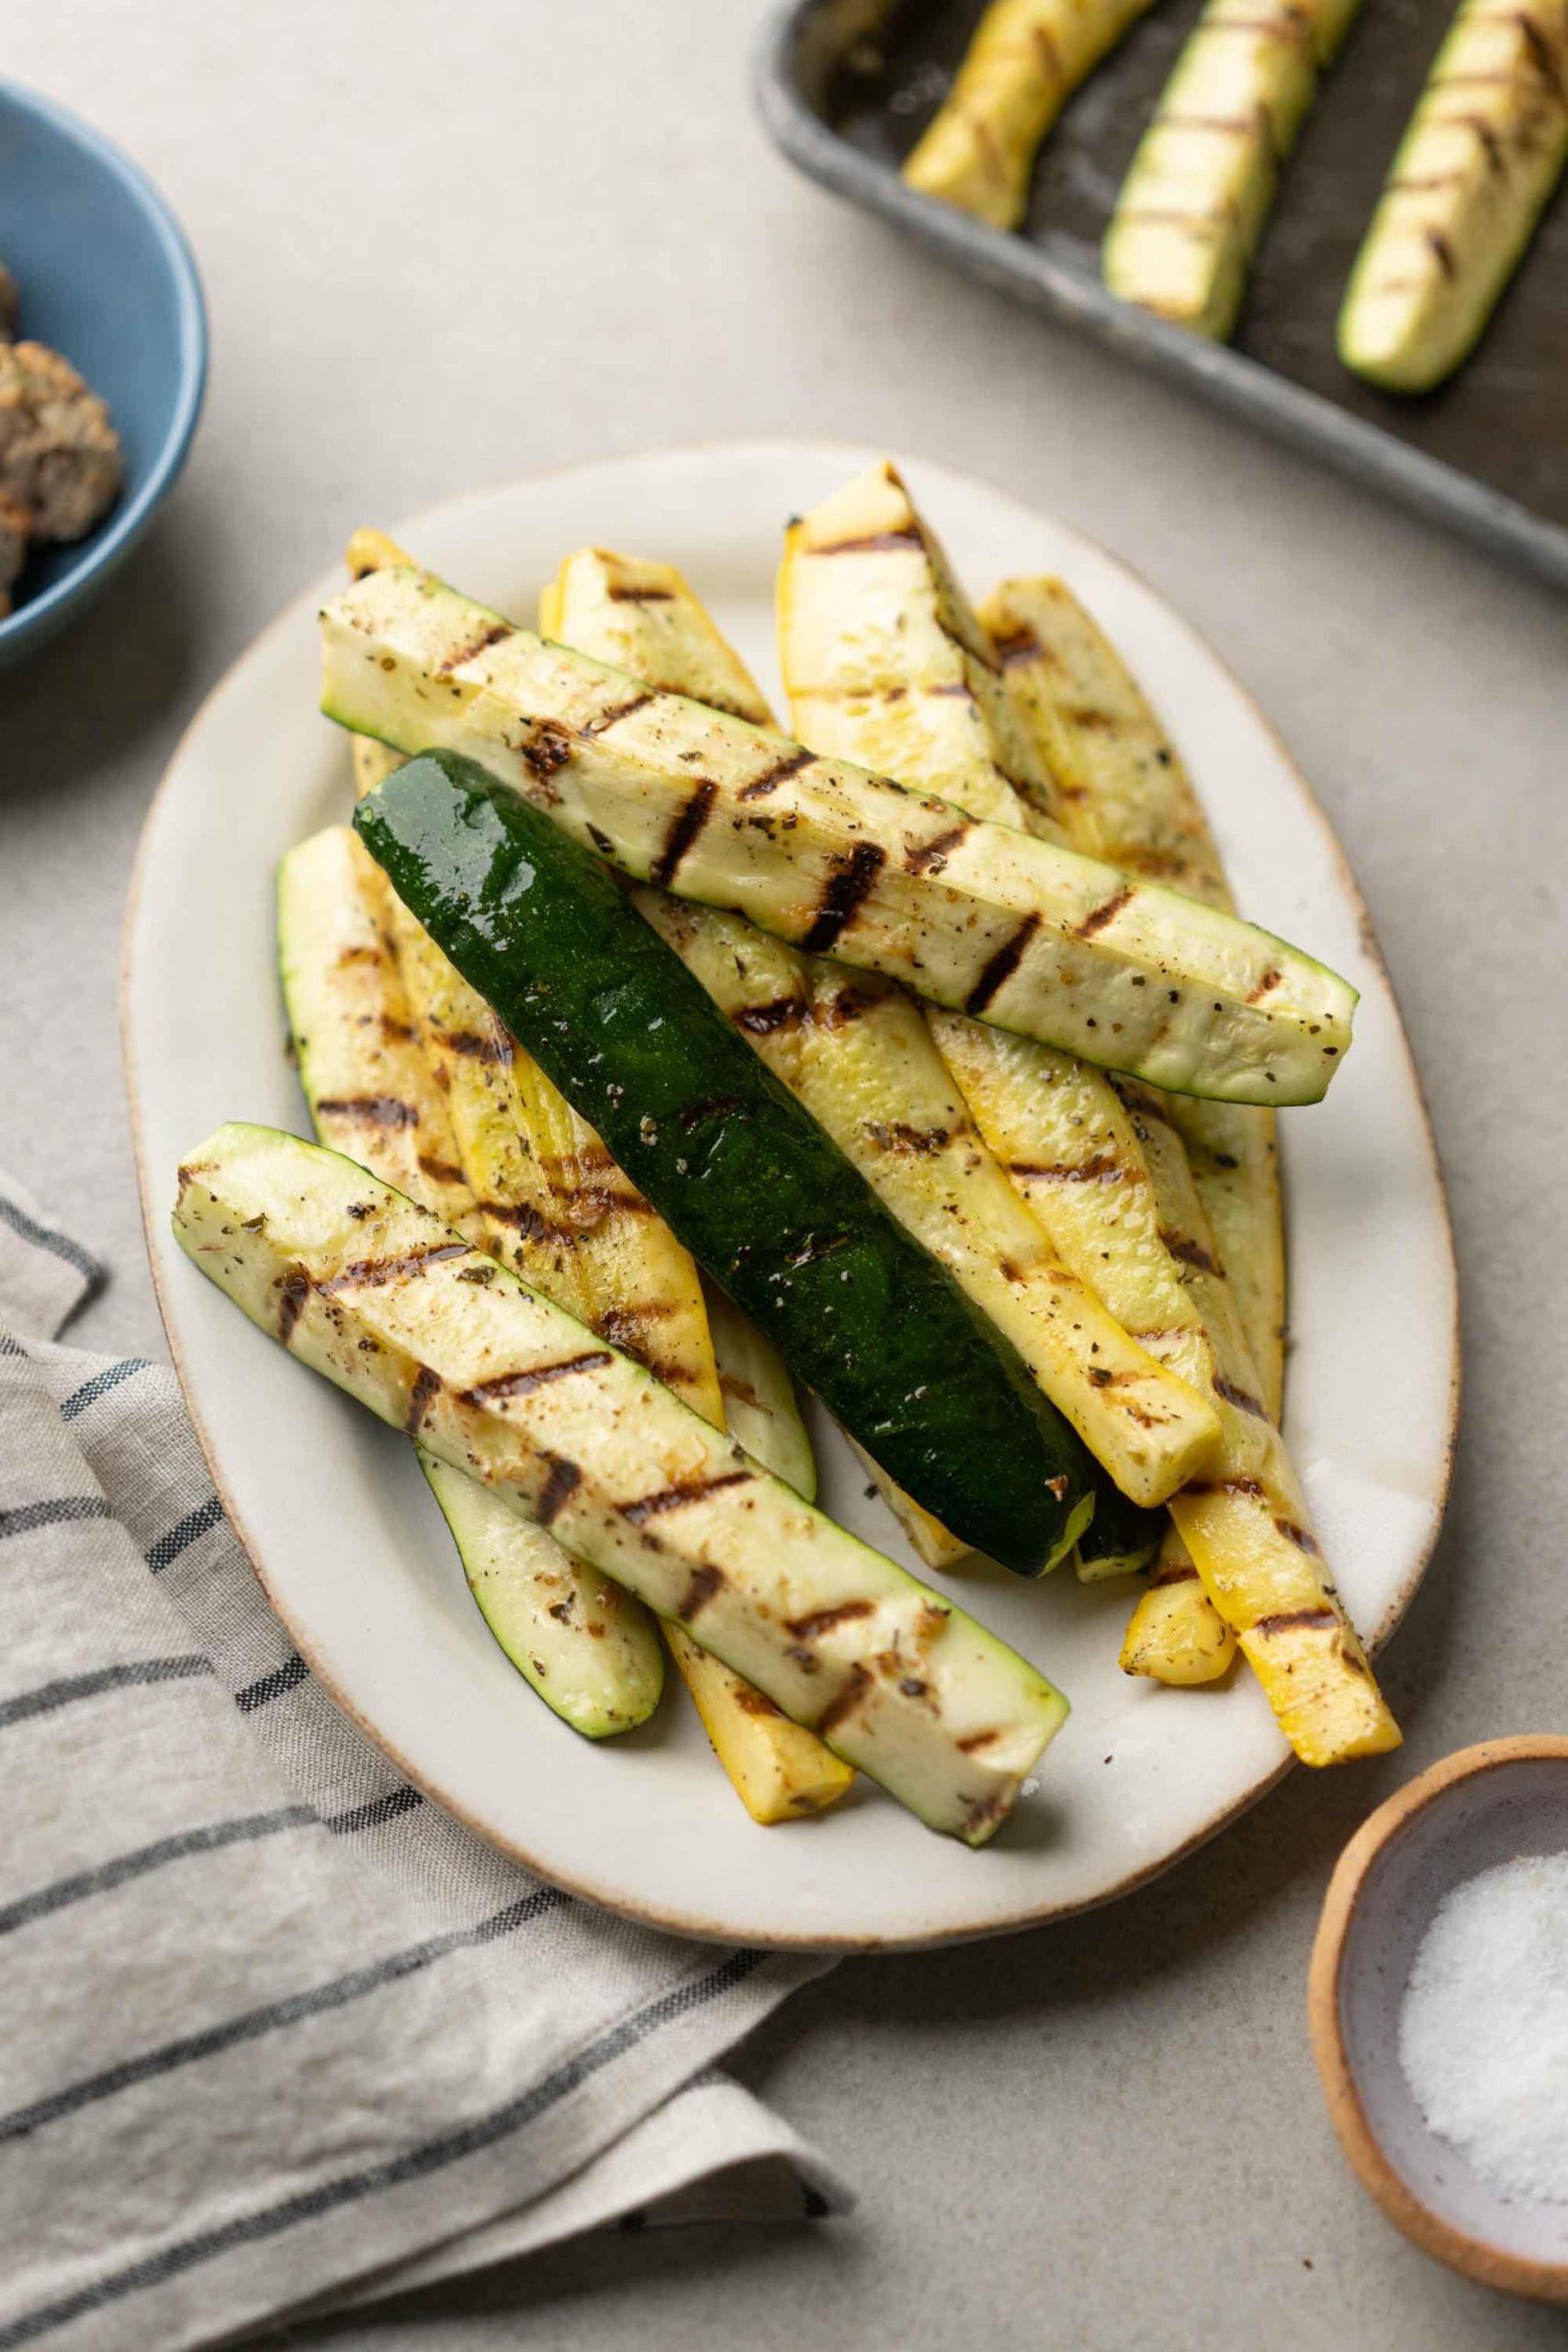 Grilled Zucchini & Squash Recipe - Fueled With Food